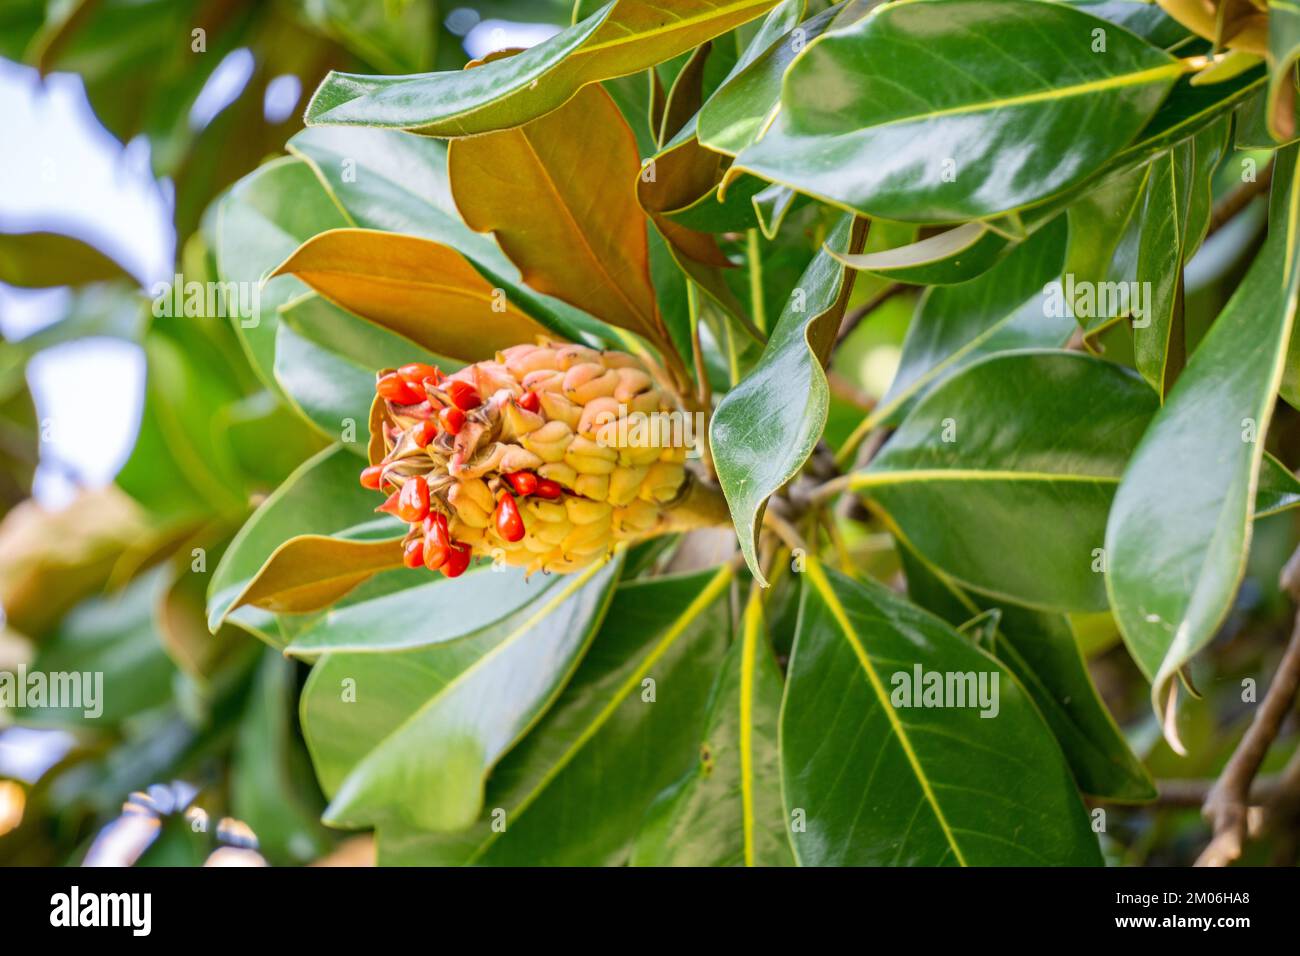 Leaves, ripe fruits and red seeds of Magnolia grandiflora close-up. Stock Photo